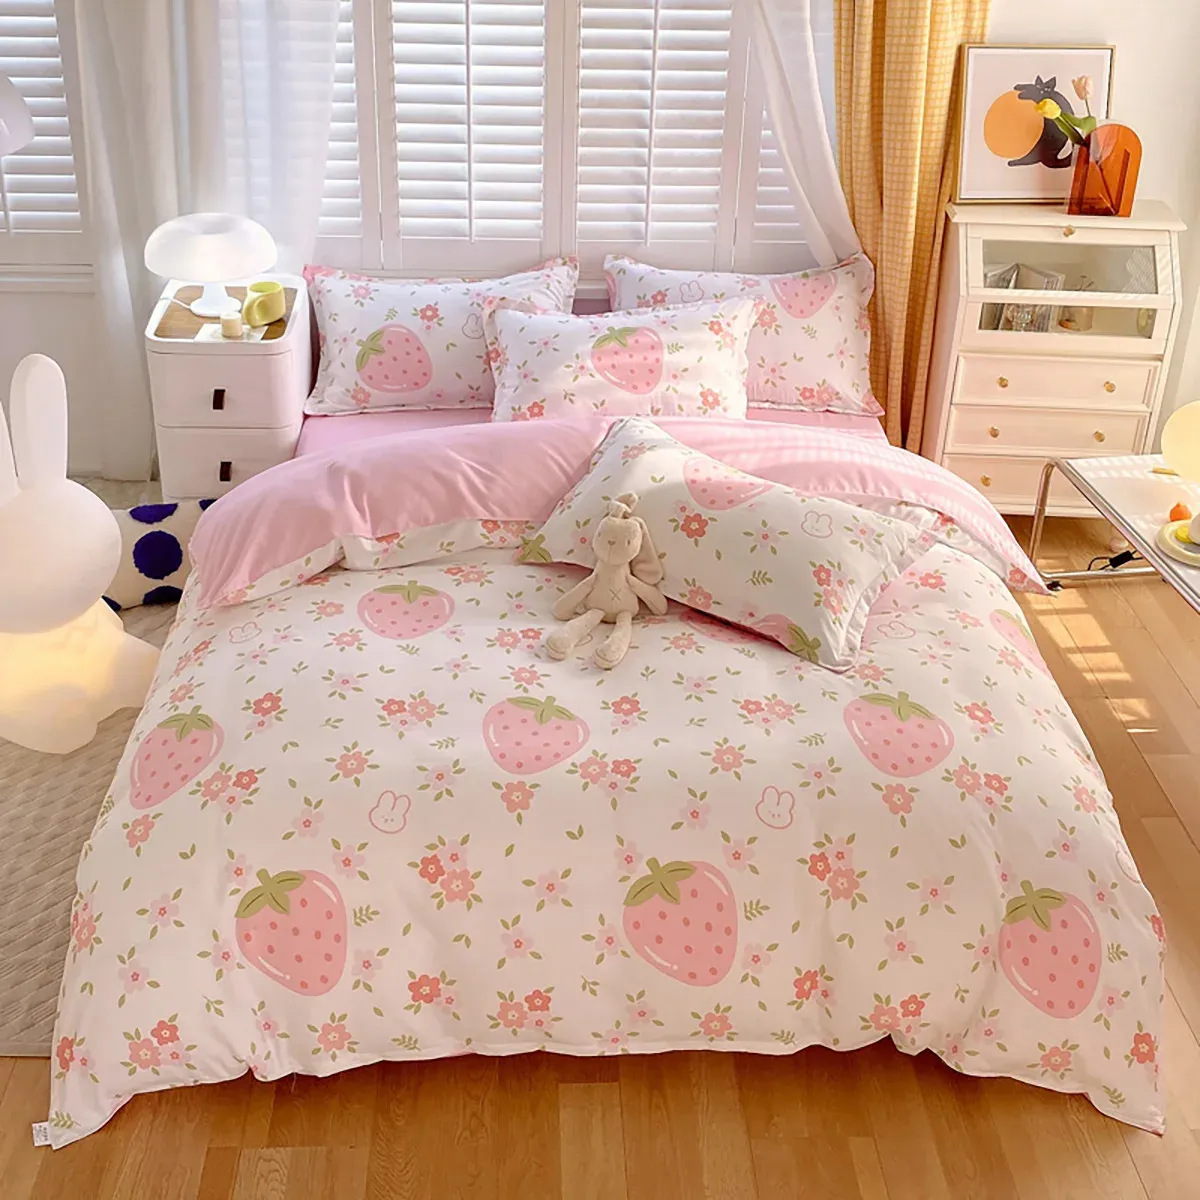 Pillow Strawberry And Pink Back Design Bedding Set Decorative 3 Piece Duvet Cover with 2 Pillow Shams